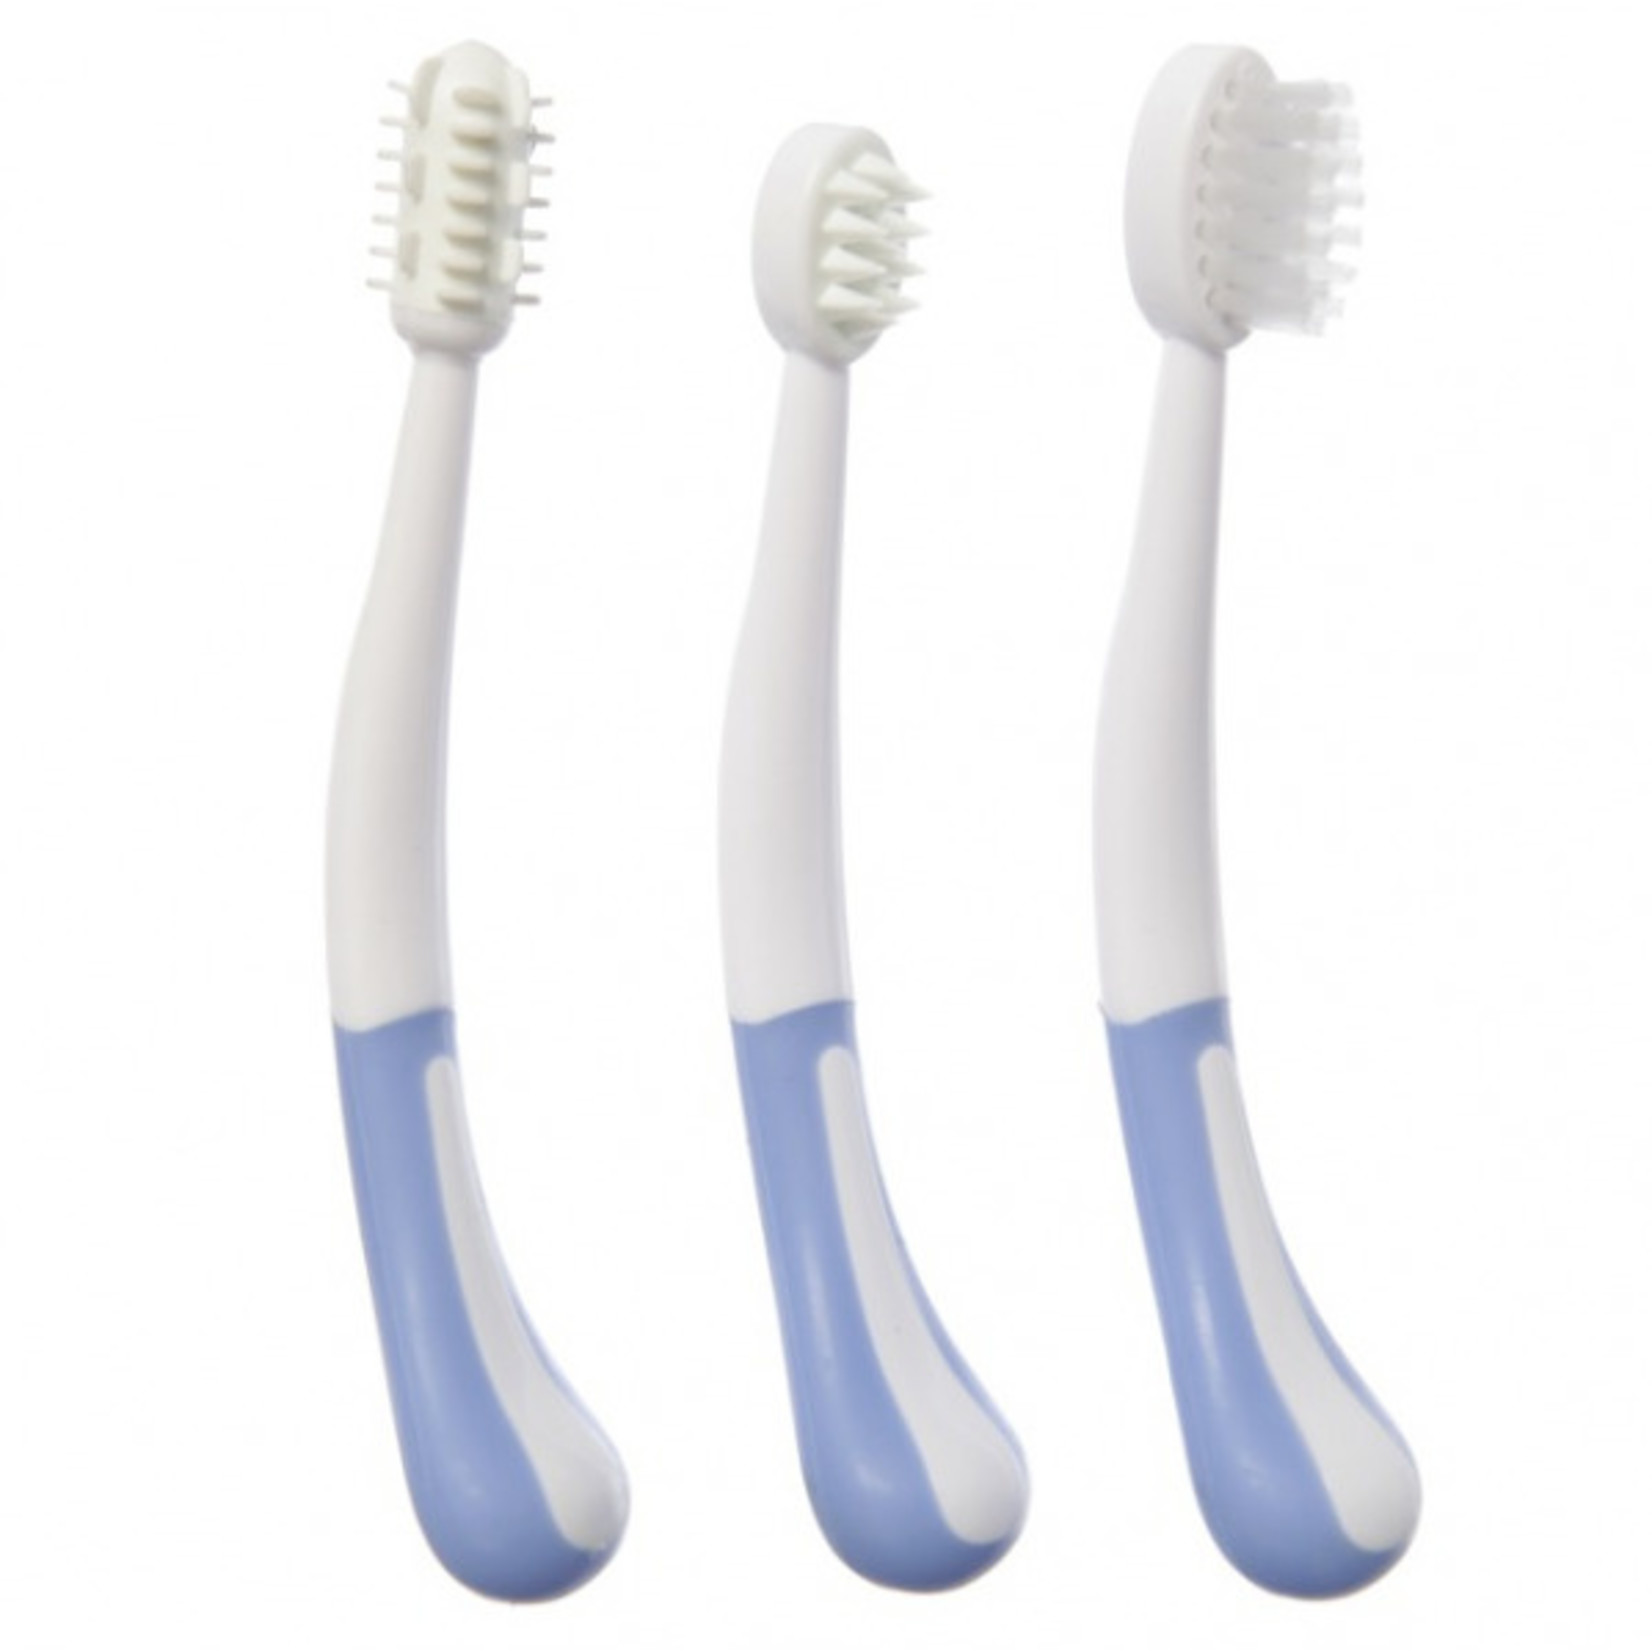 Dreambaby TOOTHBRUSH SET 3 STAGE-BLUE (F323)